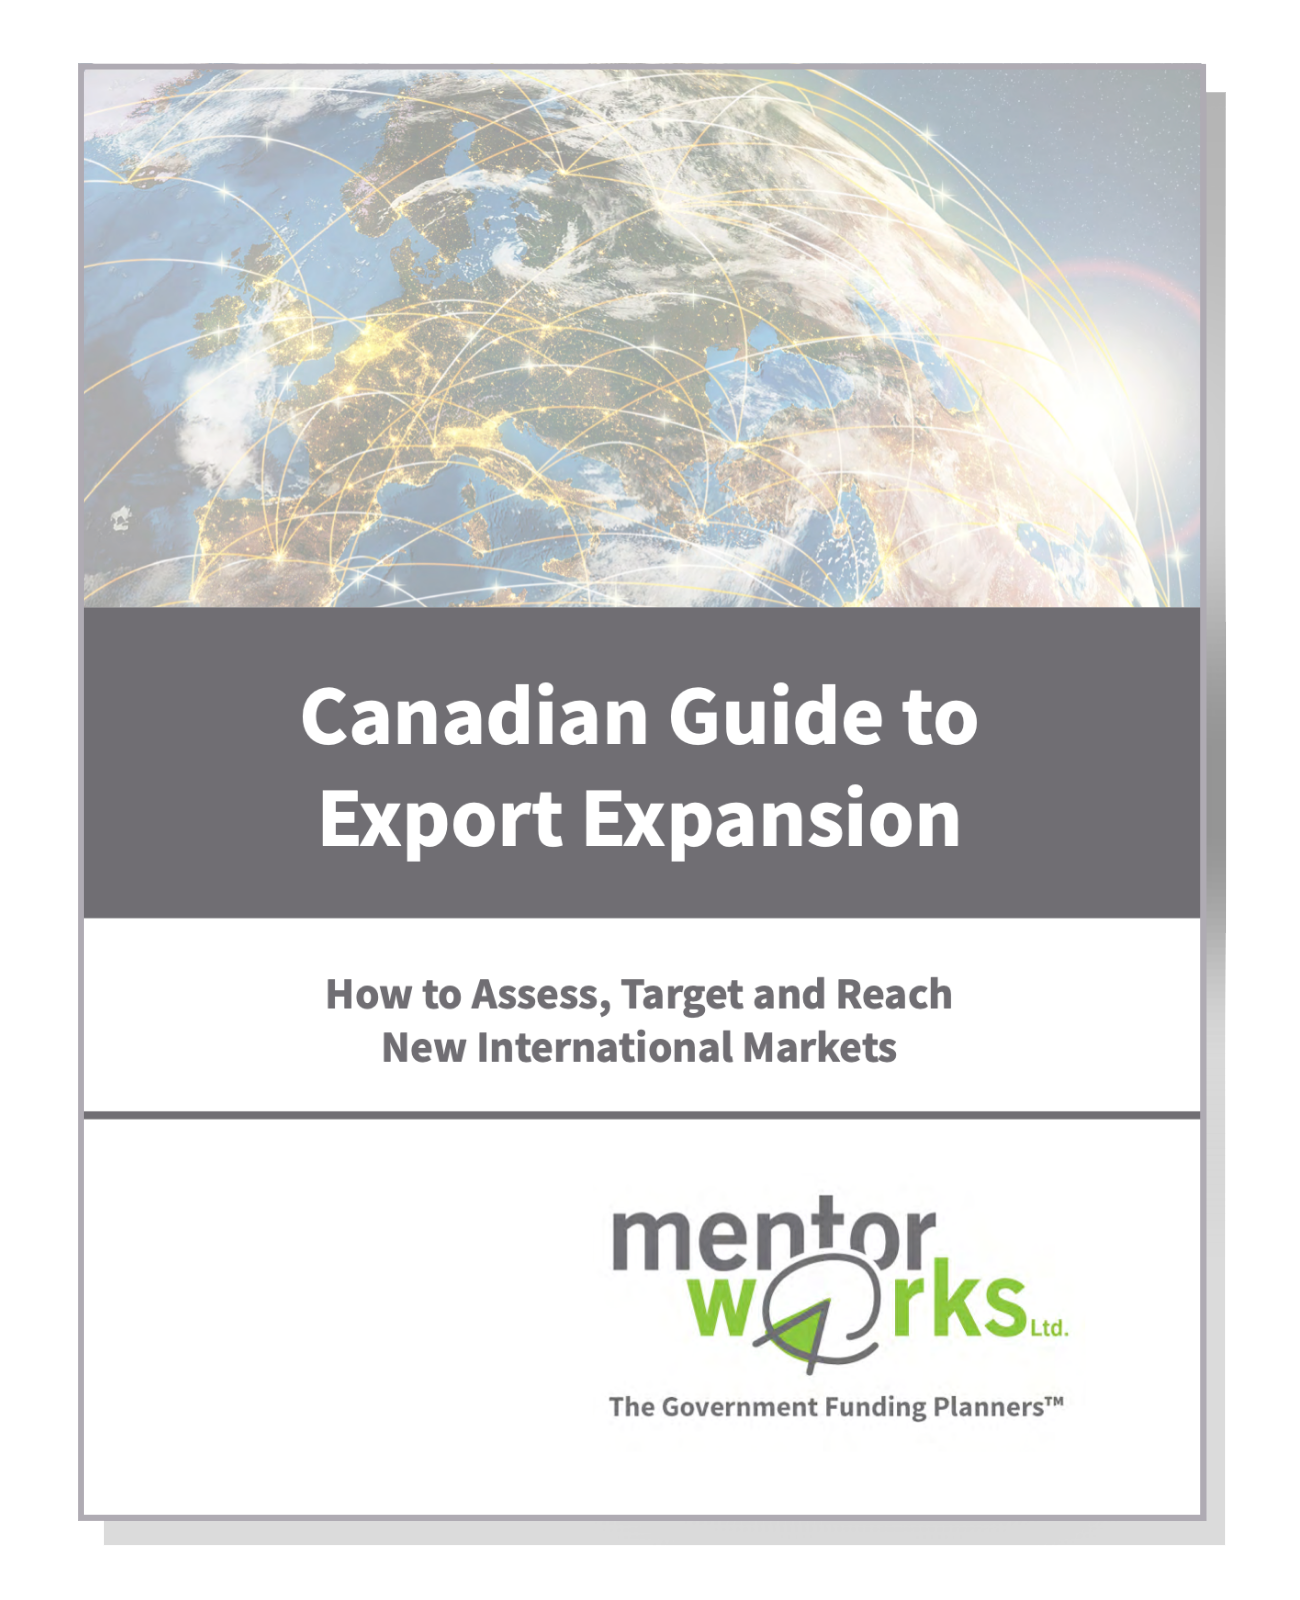 Canadian Guide to Export Expansion Drop Shadow